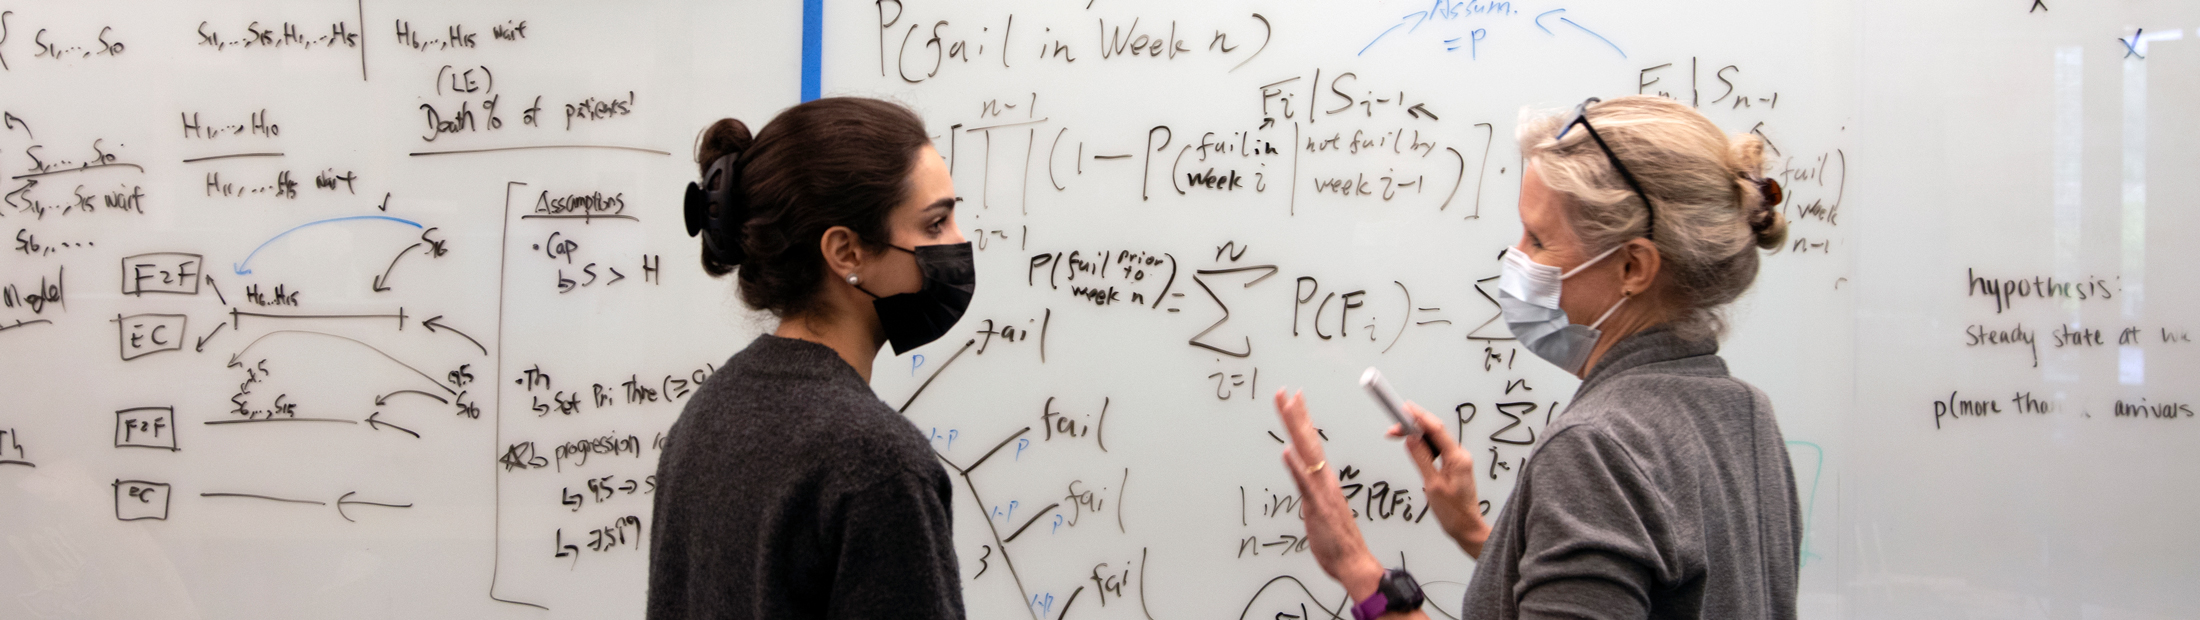 Amy Cohn talks with another researcher at a white board with equations on it